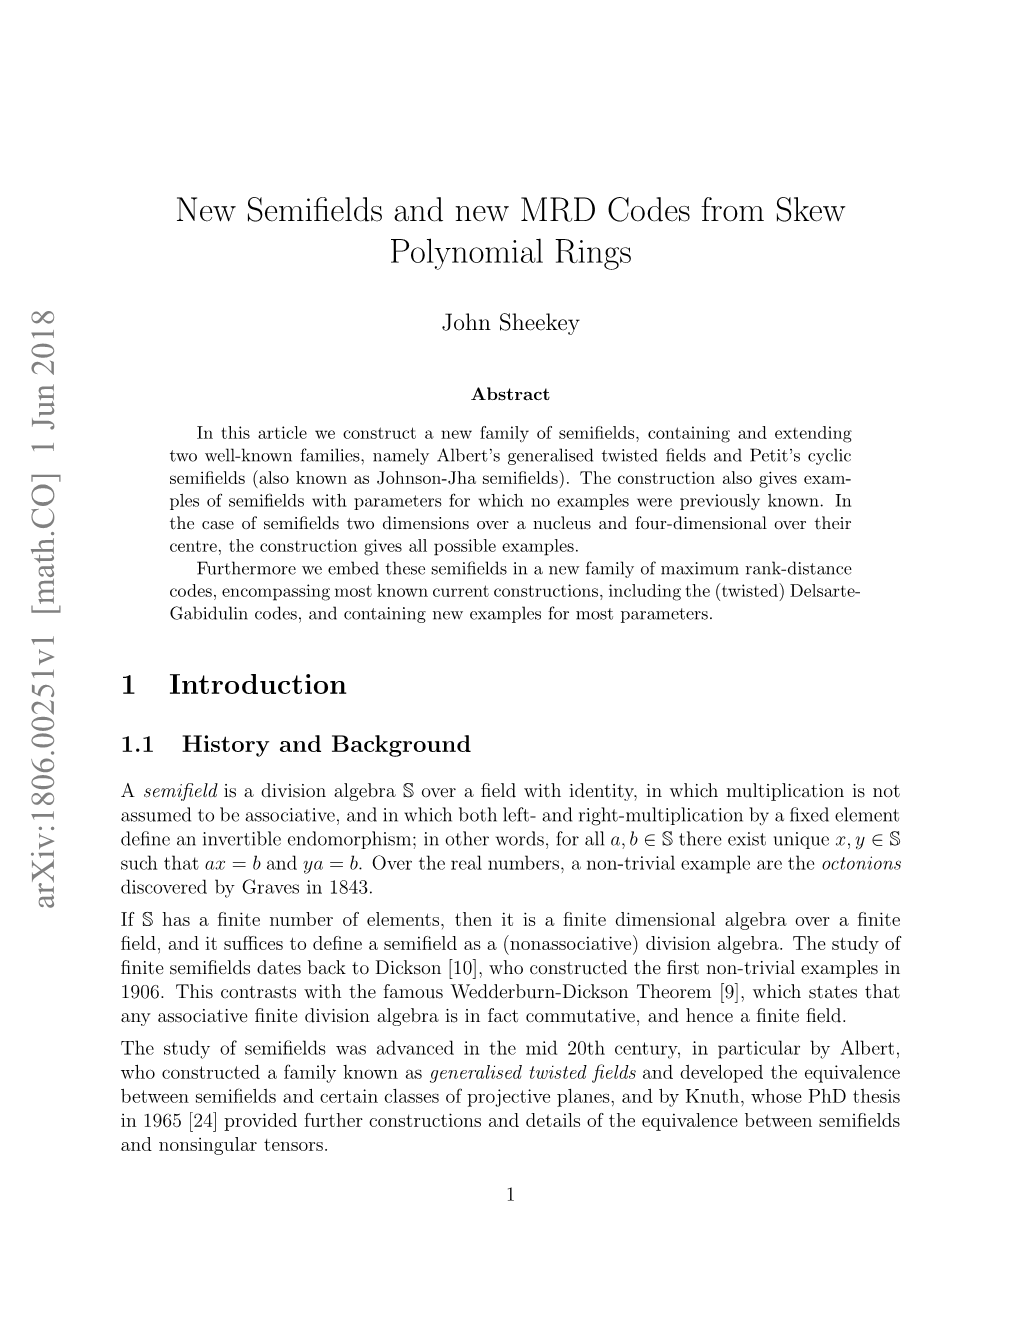 New Semifields and New MRD Codes from Skew Polynomial Rings